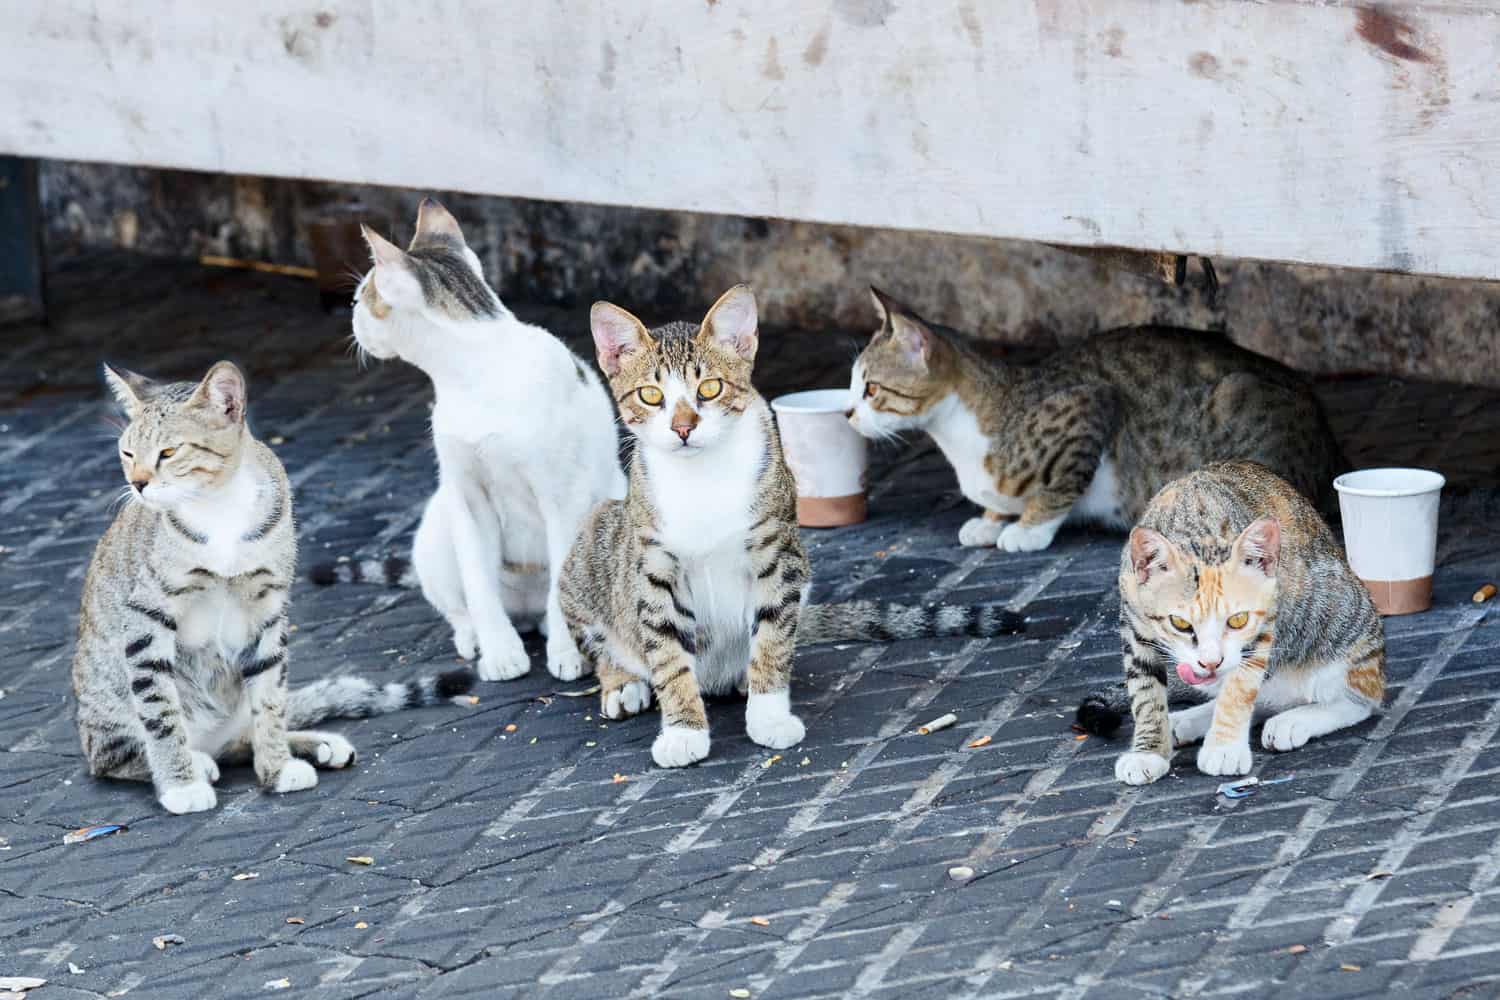 A large pack of stray cats